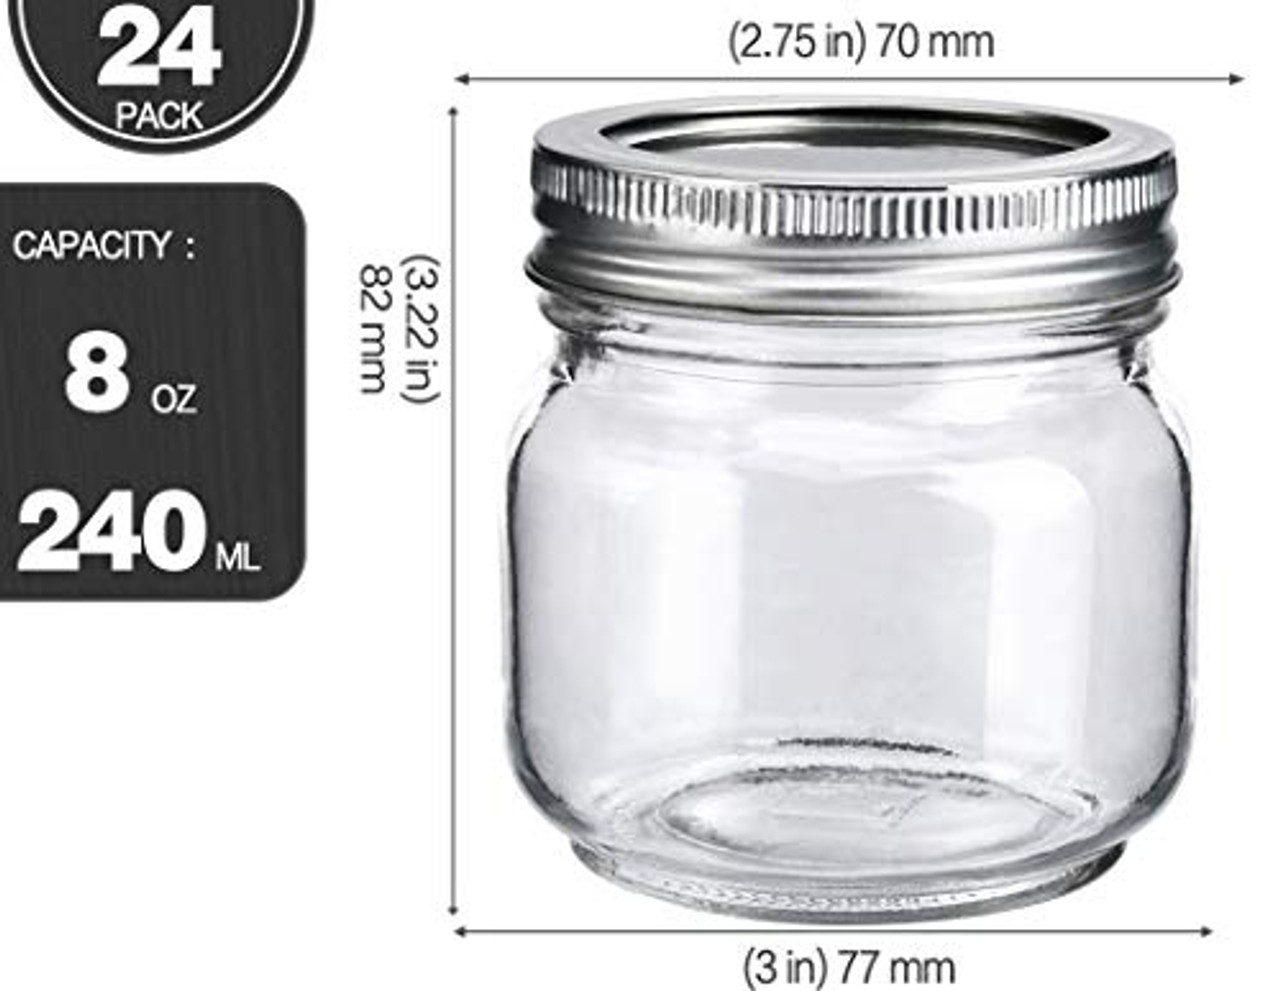 Superlele 30pcs 1.5oz Hexagon Mini Glass Jars with Gold Lids, Honey Jars  Small Spice Jars For Herbs with 80pcs Stickers, 2pcs Brush for Spices,  Gifts